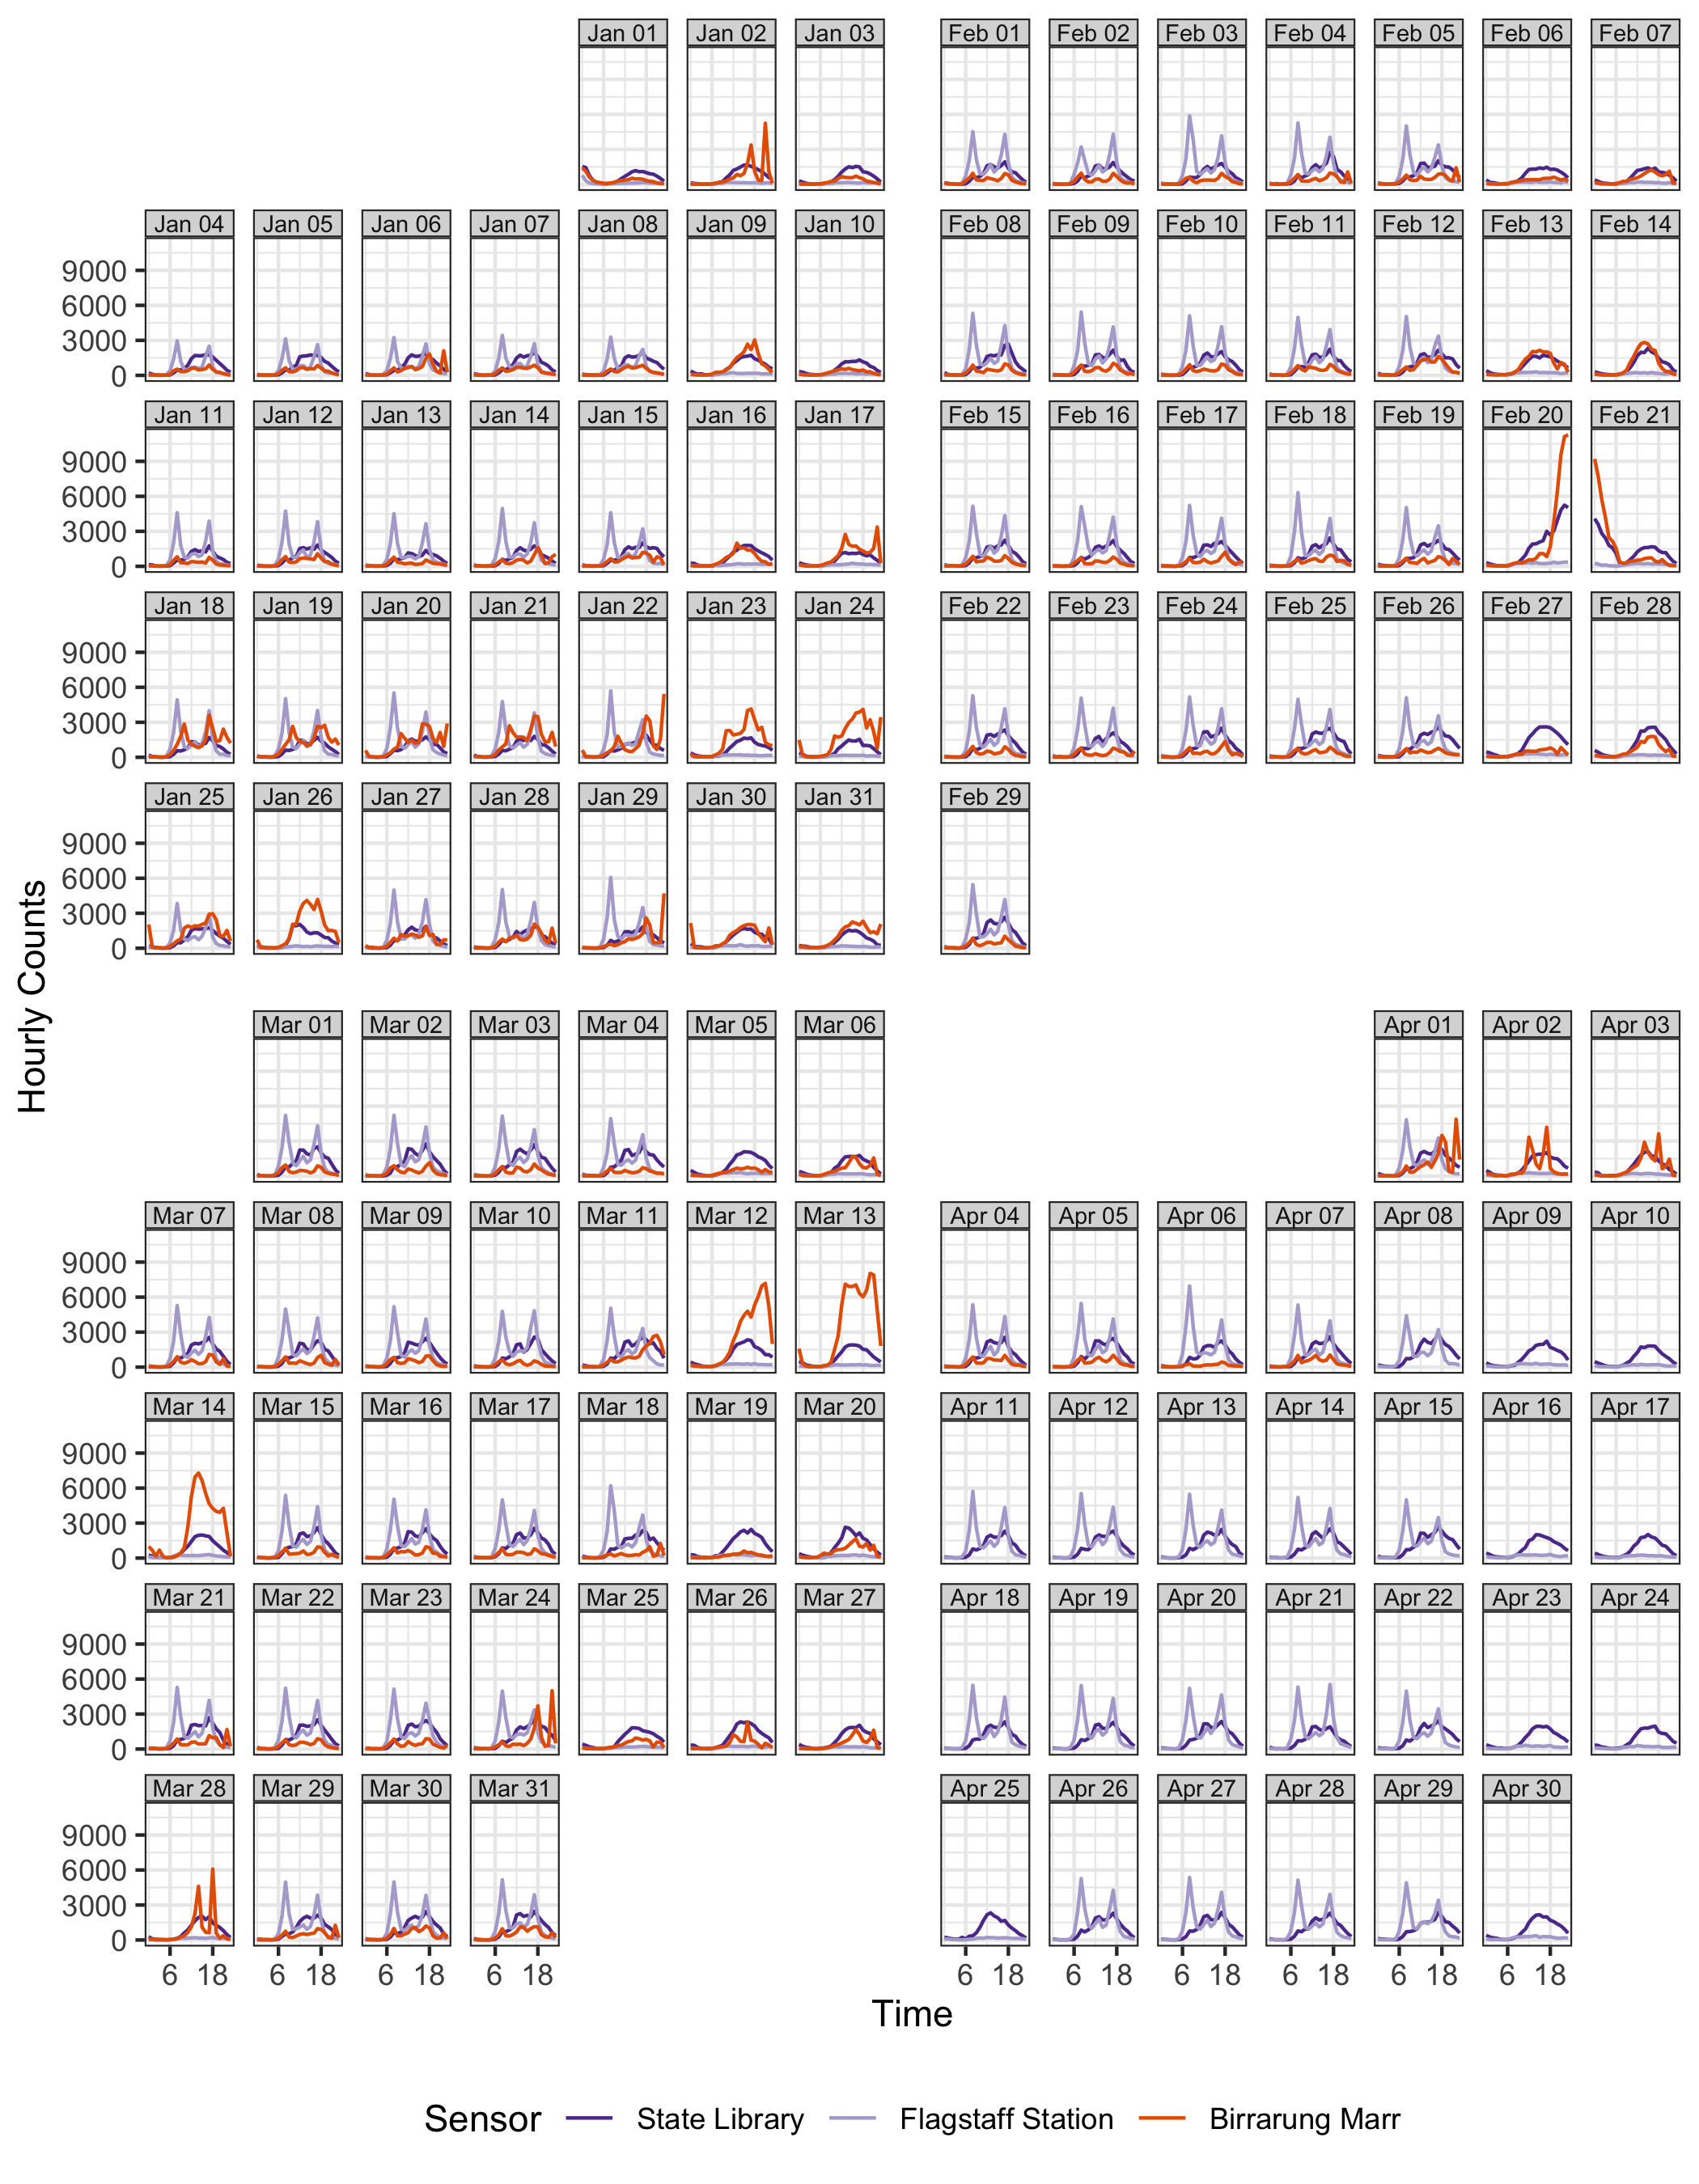 A faceted calendar showing a fraction of the data shown in Figure 2.6. The faceted calendar takes more plot real estate than the calendar plot, but it provides native ggplot2 support for labels and axes.